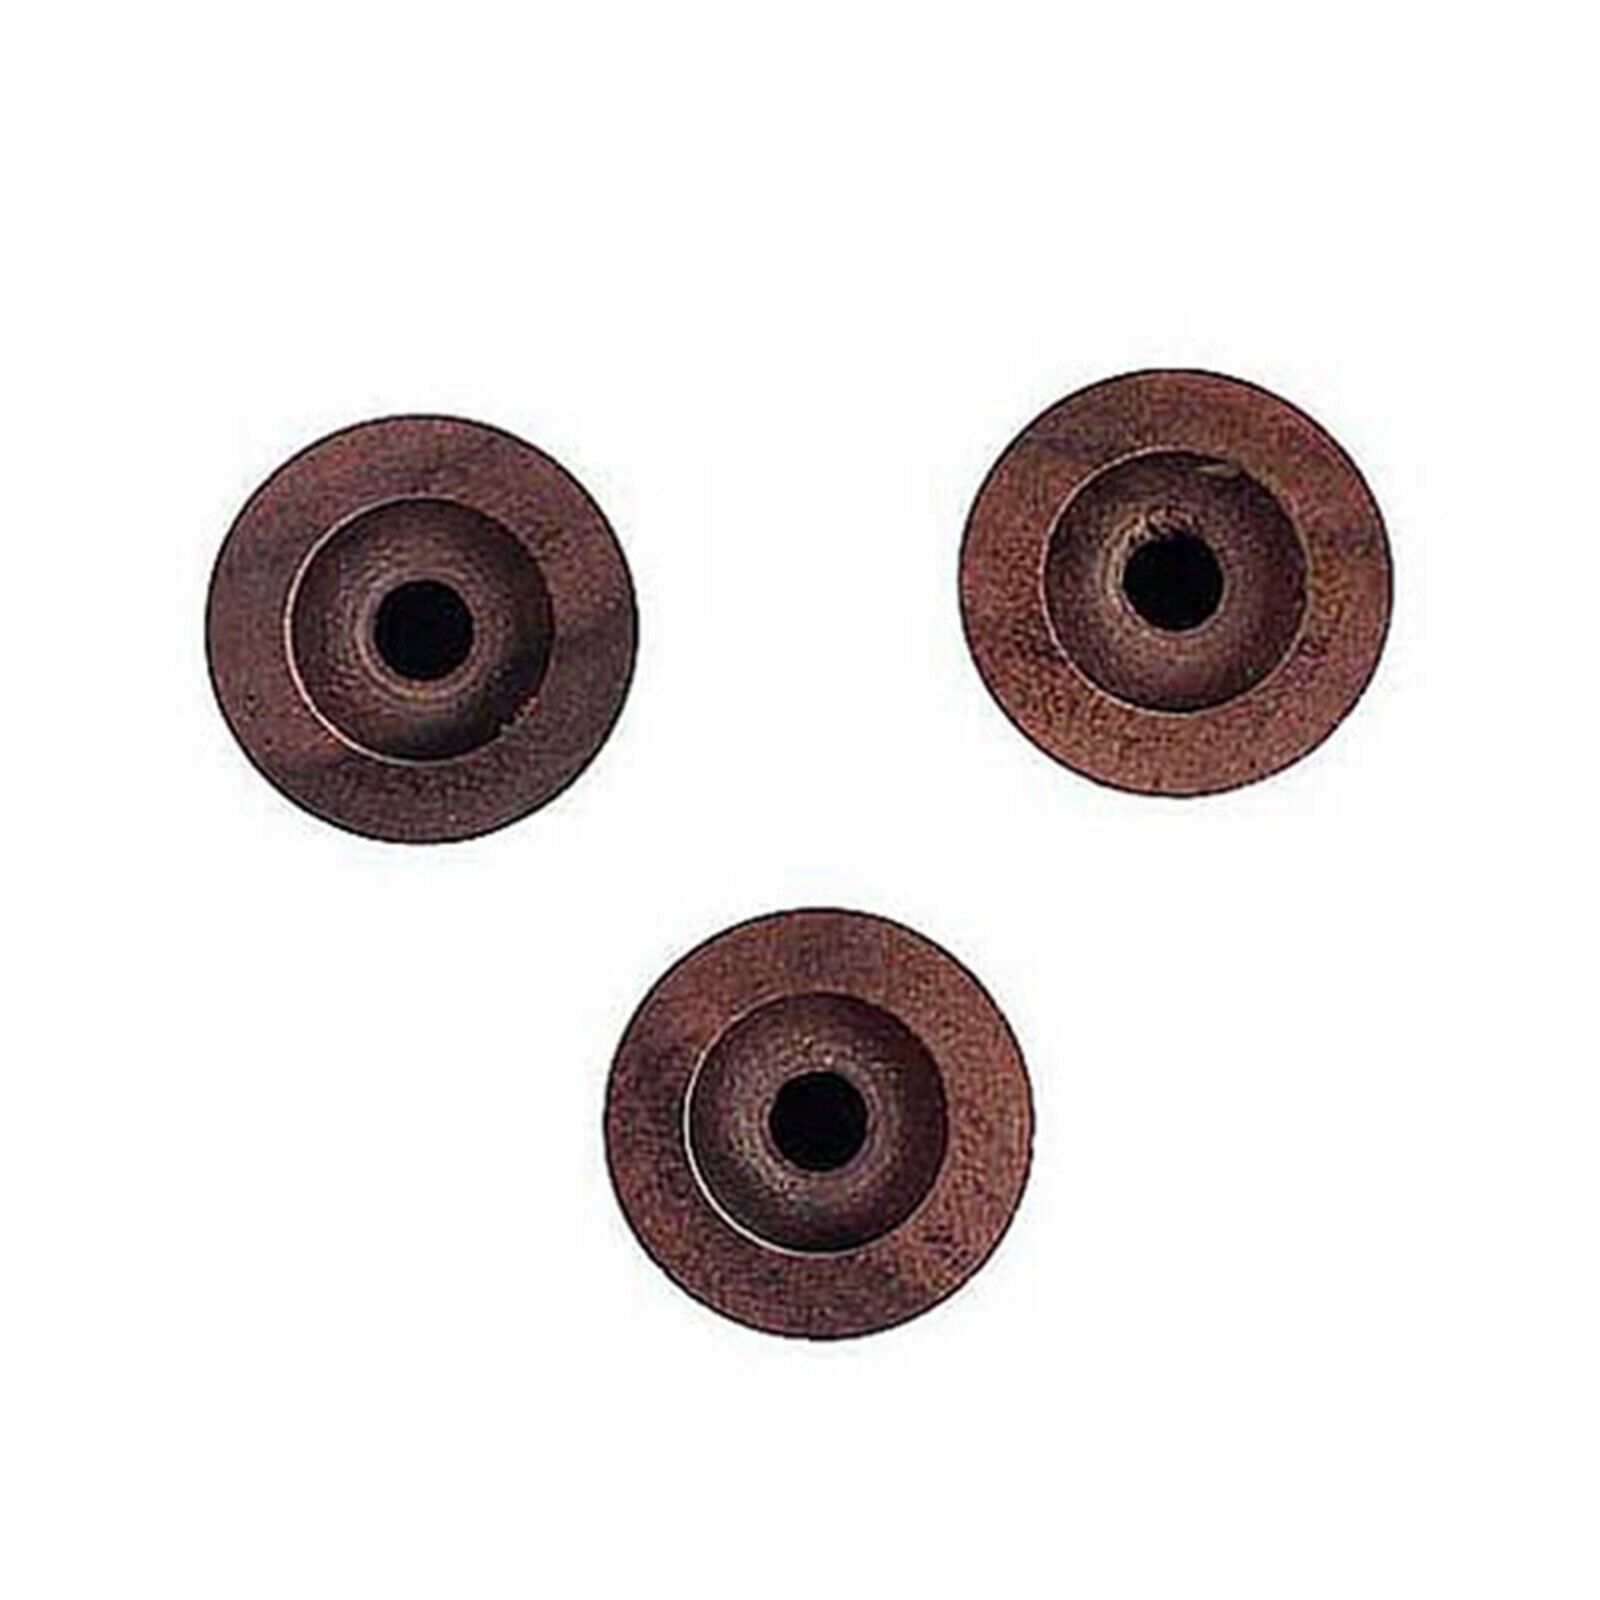 3pcs Electric Guitar Speed Knobs Control Grip Musical Instrument Spare Parts